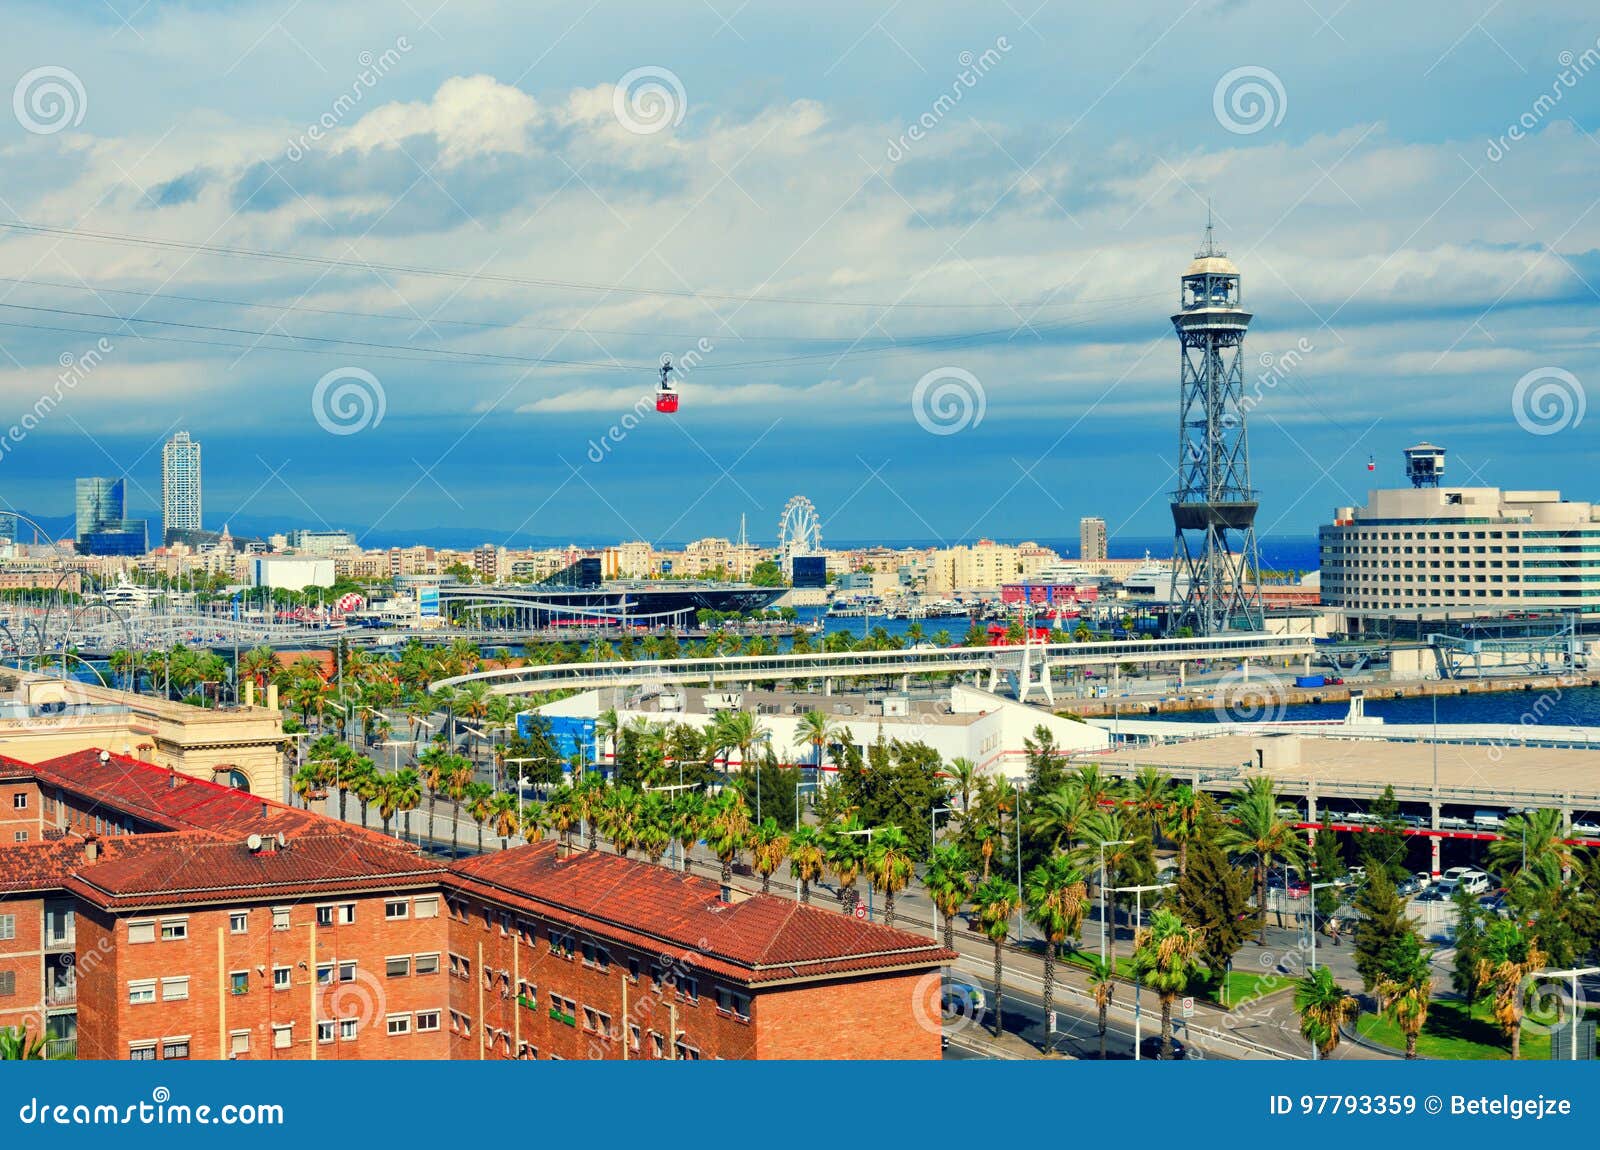 aerial view of barcelona. la barceloneta, port vell, sea and red cabin of the cableway. catalonia, spain